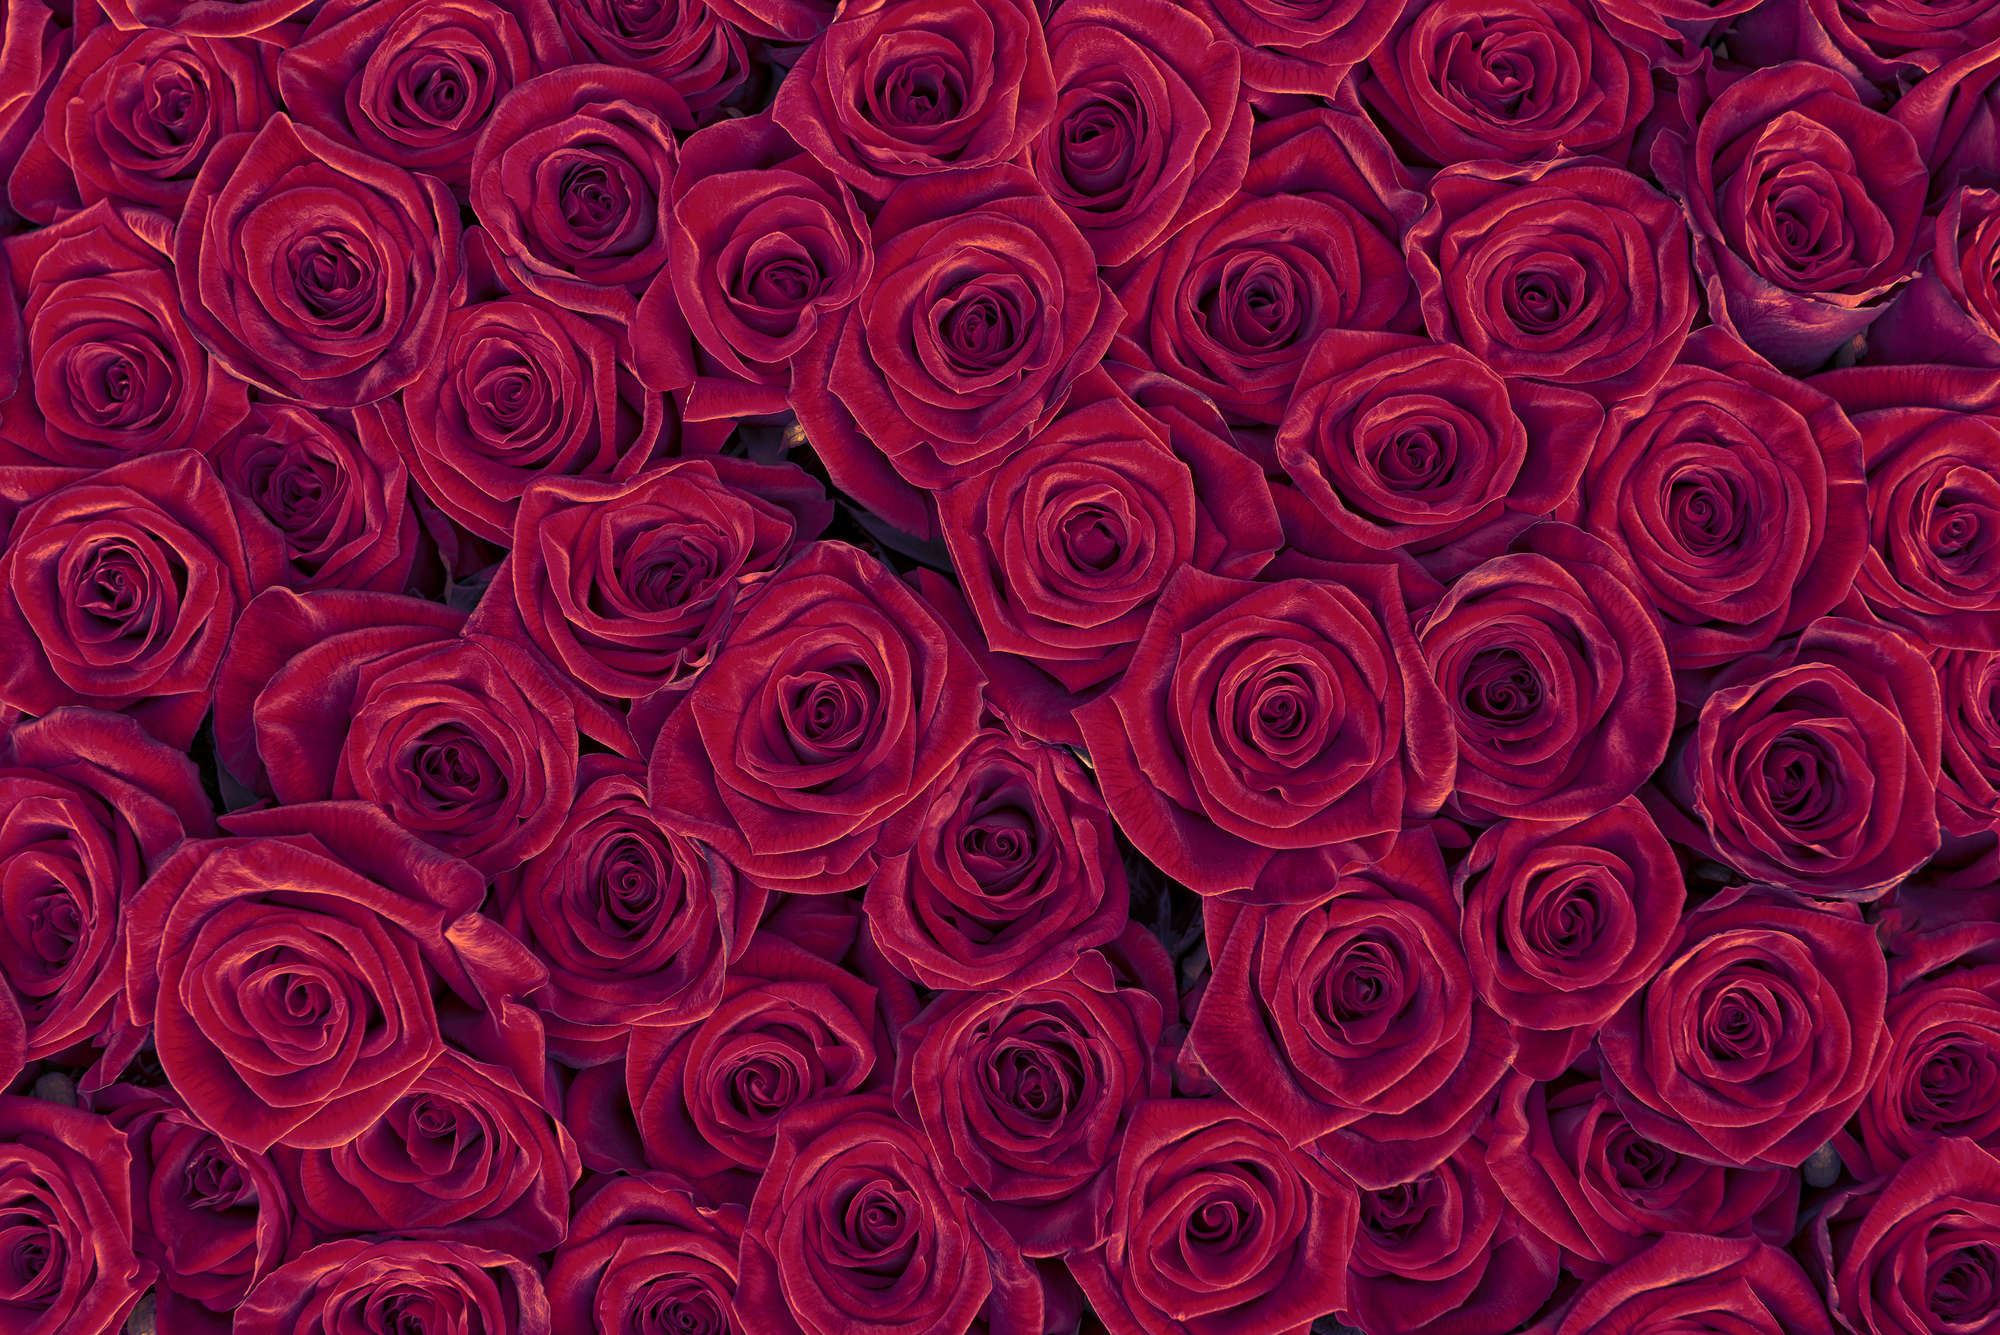             Plants mural red roses on textured nonwoven
        